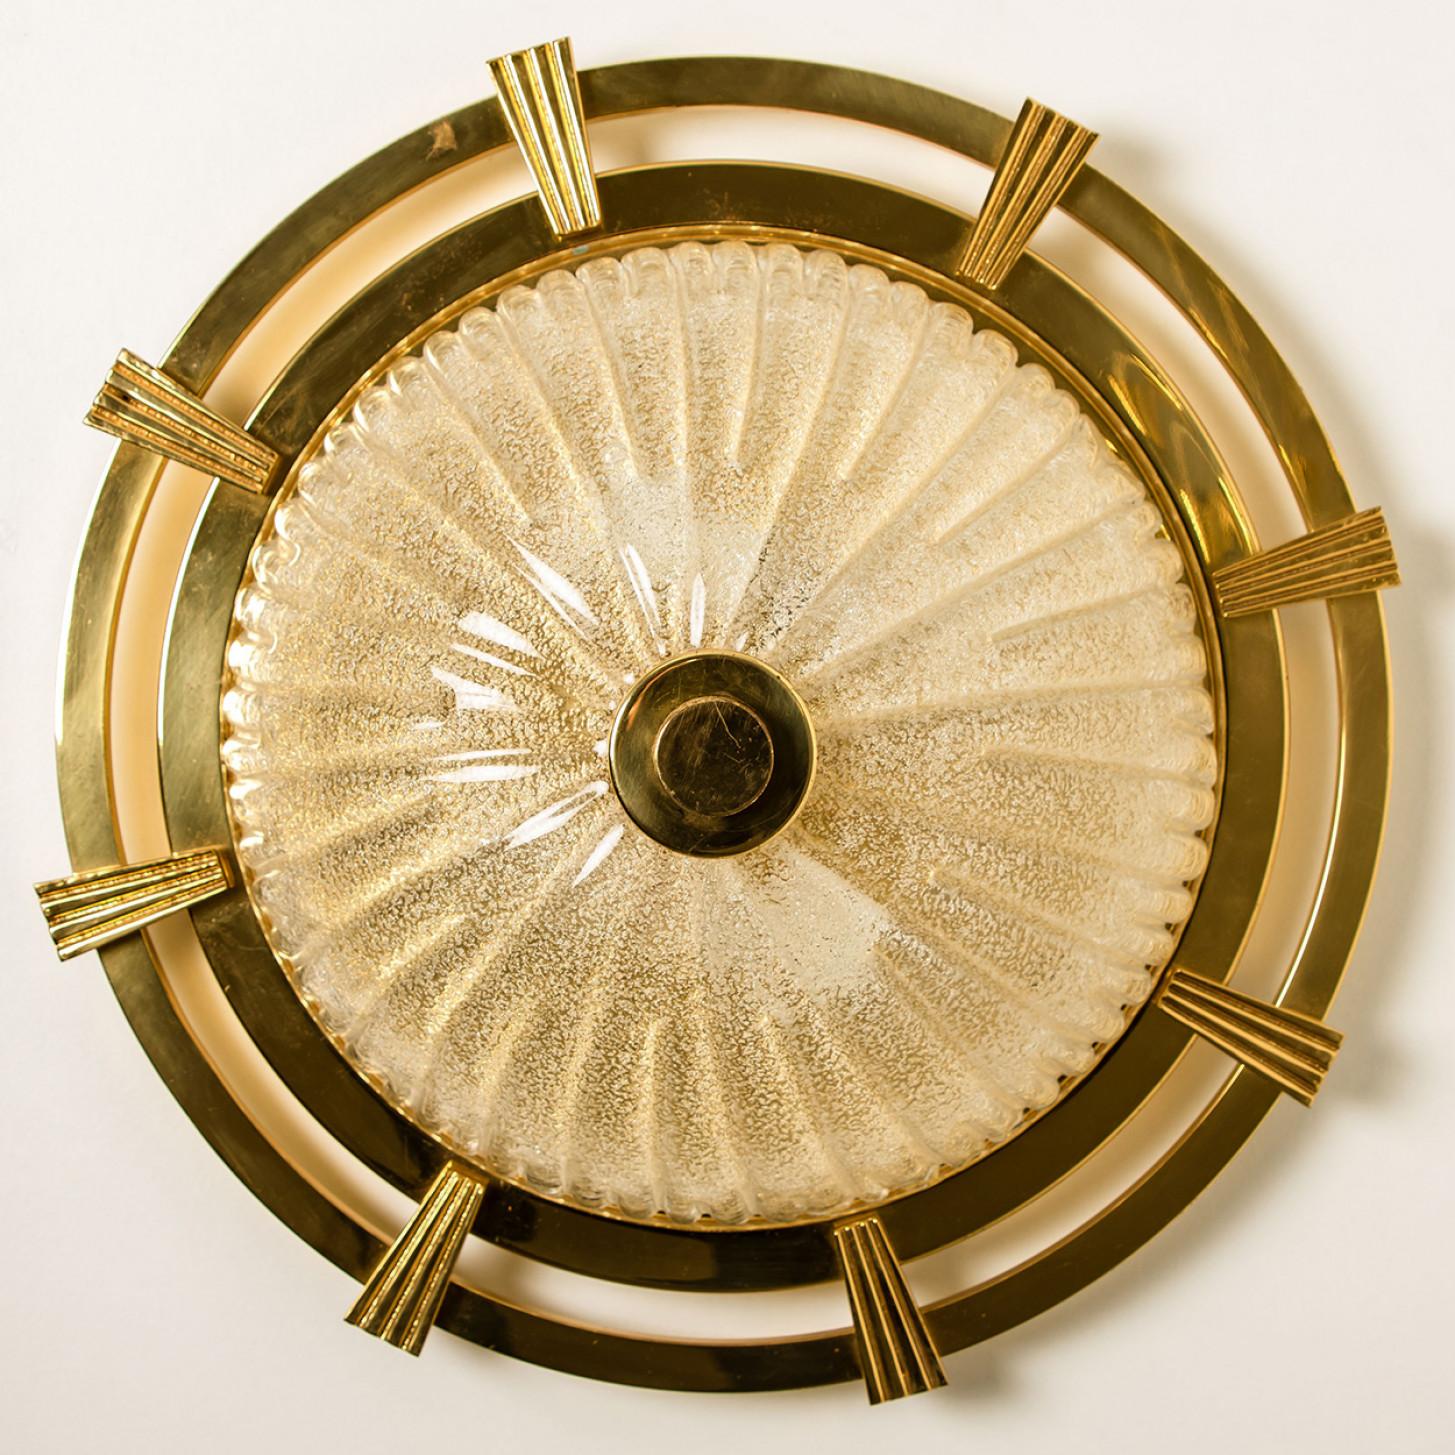 A wonderful round golden flush mount, circa 1970, made by Glashütte Limburg, Germany.
With hand blown textured glass on a gold base and a sun-like structure in gold. Illuminates beautifully.
Can either be mounted on the ceiling or on a